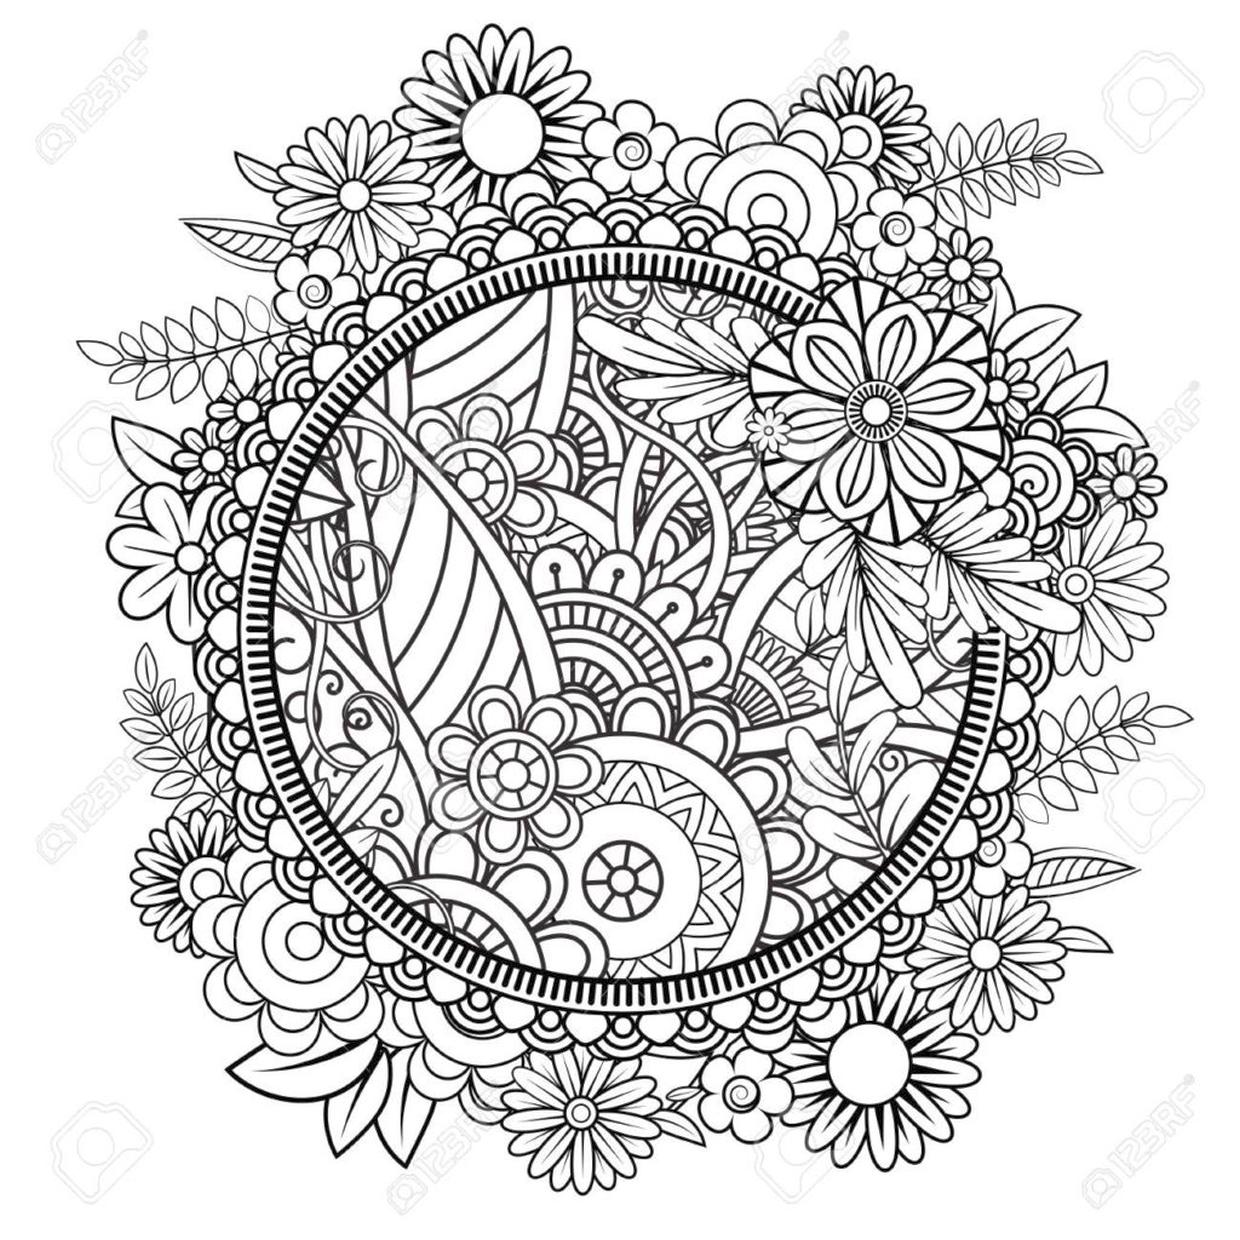 Get This Flower Coloring Pages for Adults Floral Patterns mdl5